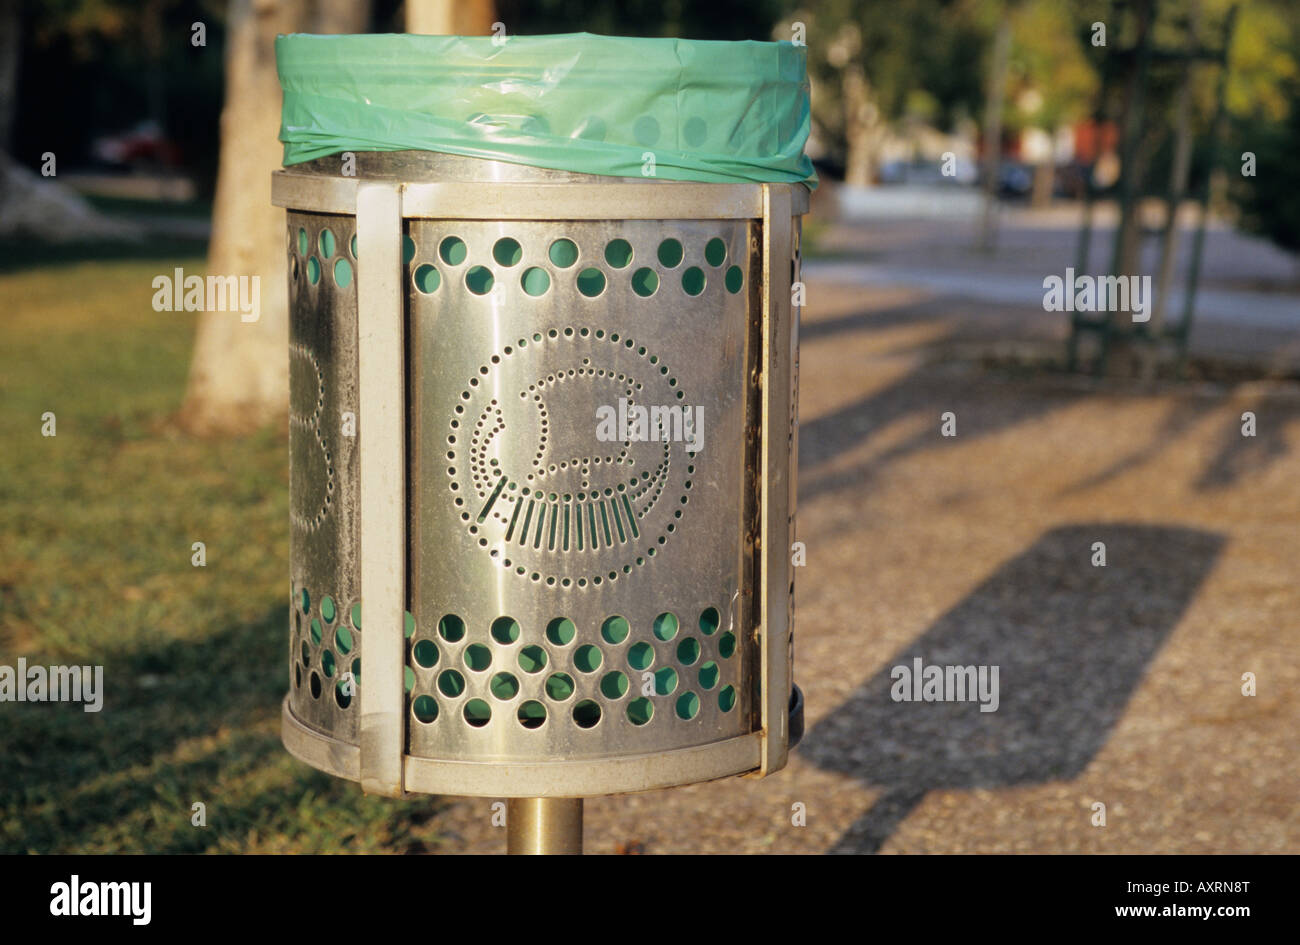 Rubbish bins of Volos are decorated with an image of Jason and the Argonauts ship, The Argo, Thessaly, Greece Stock Photo